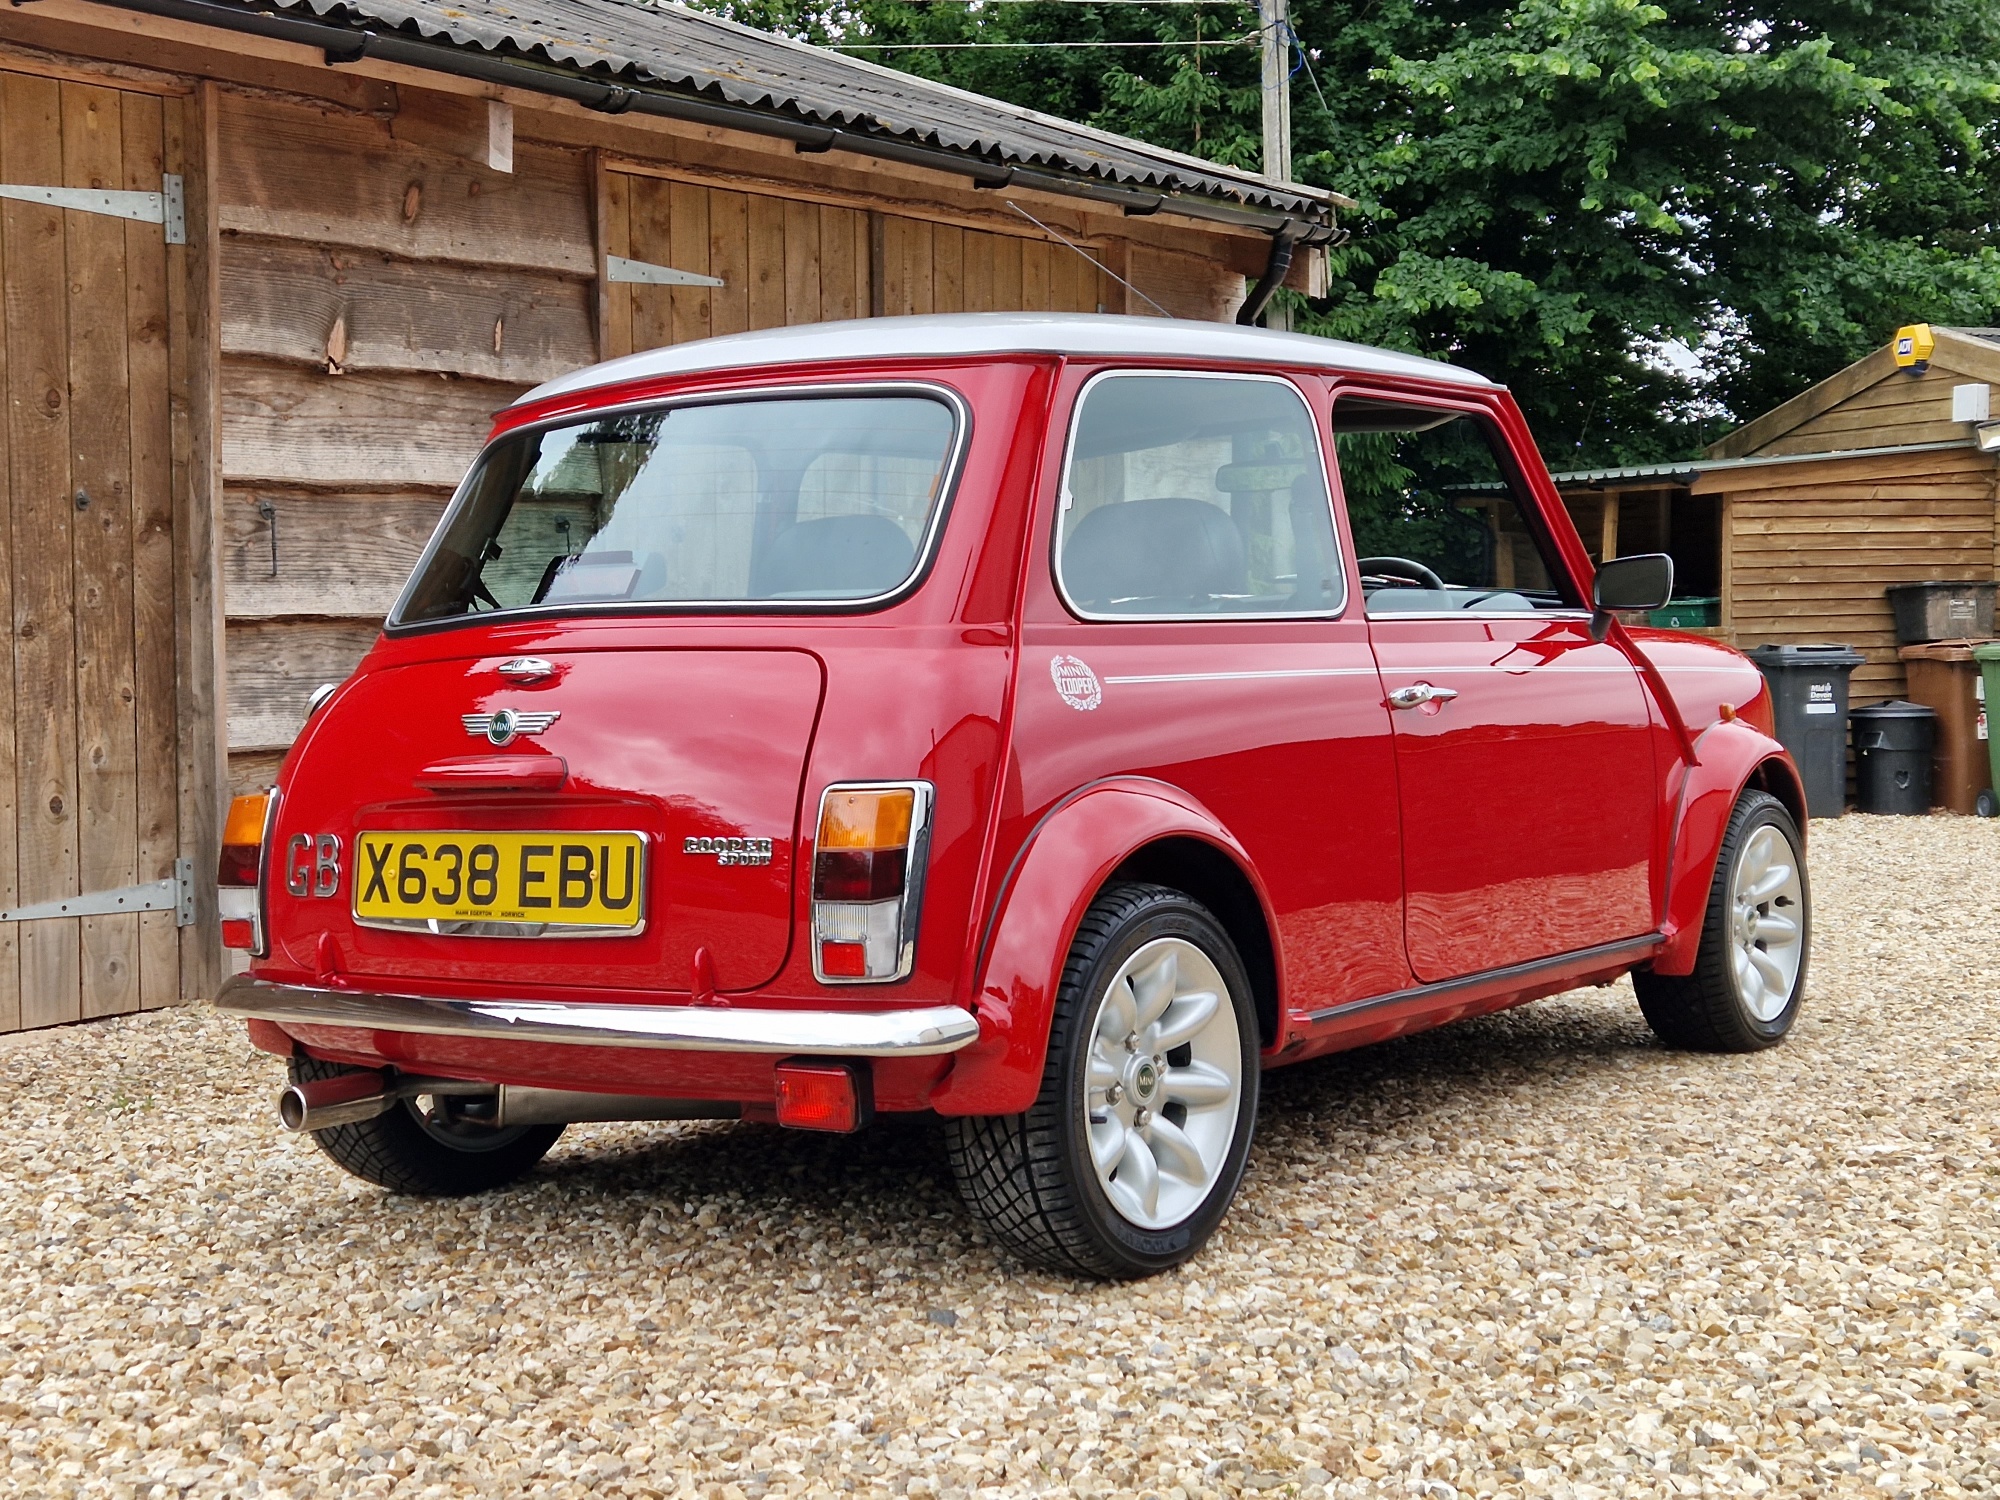 ** NOW SOLD ** 2000 Rover Mini Cooper Sport On Just 3600 Miles From New!